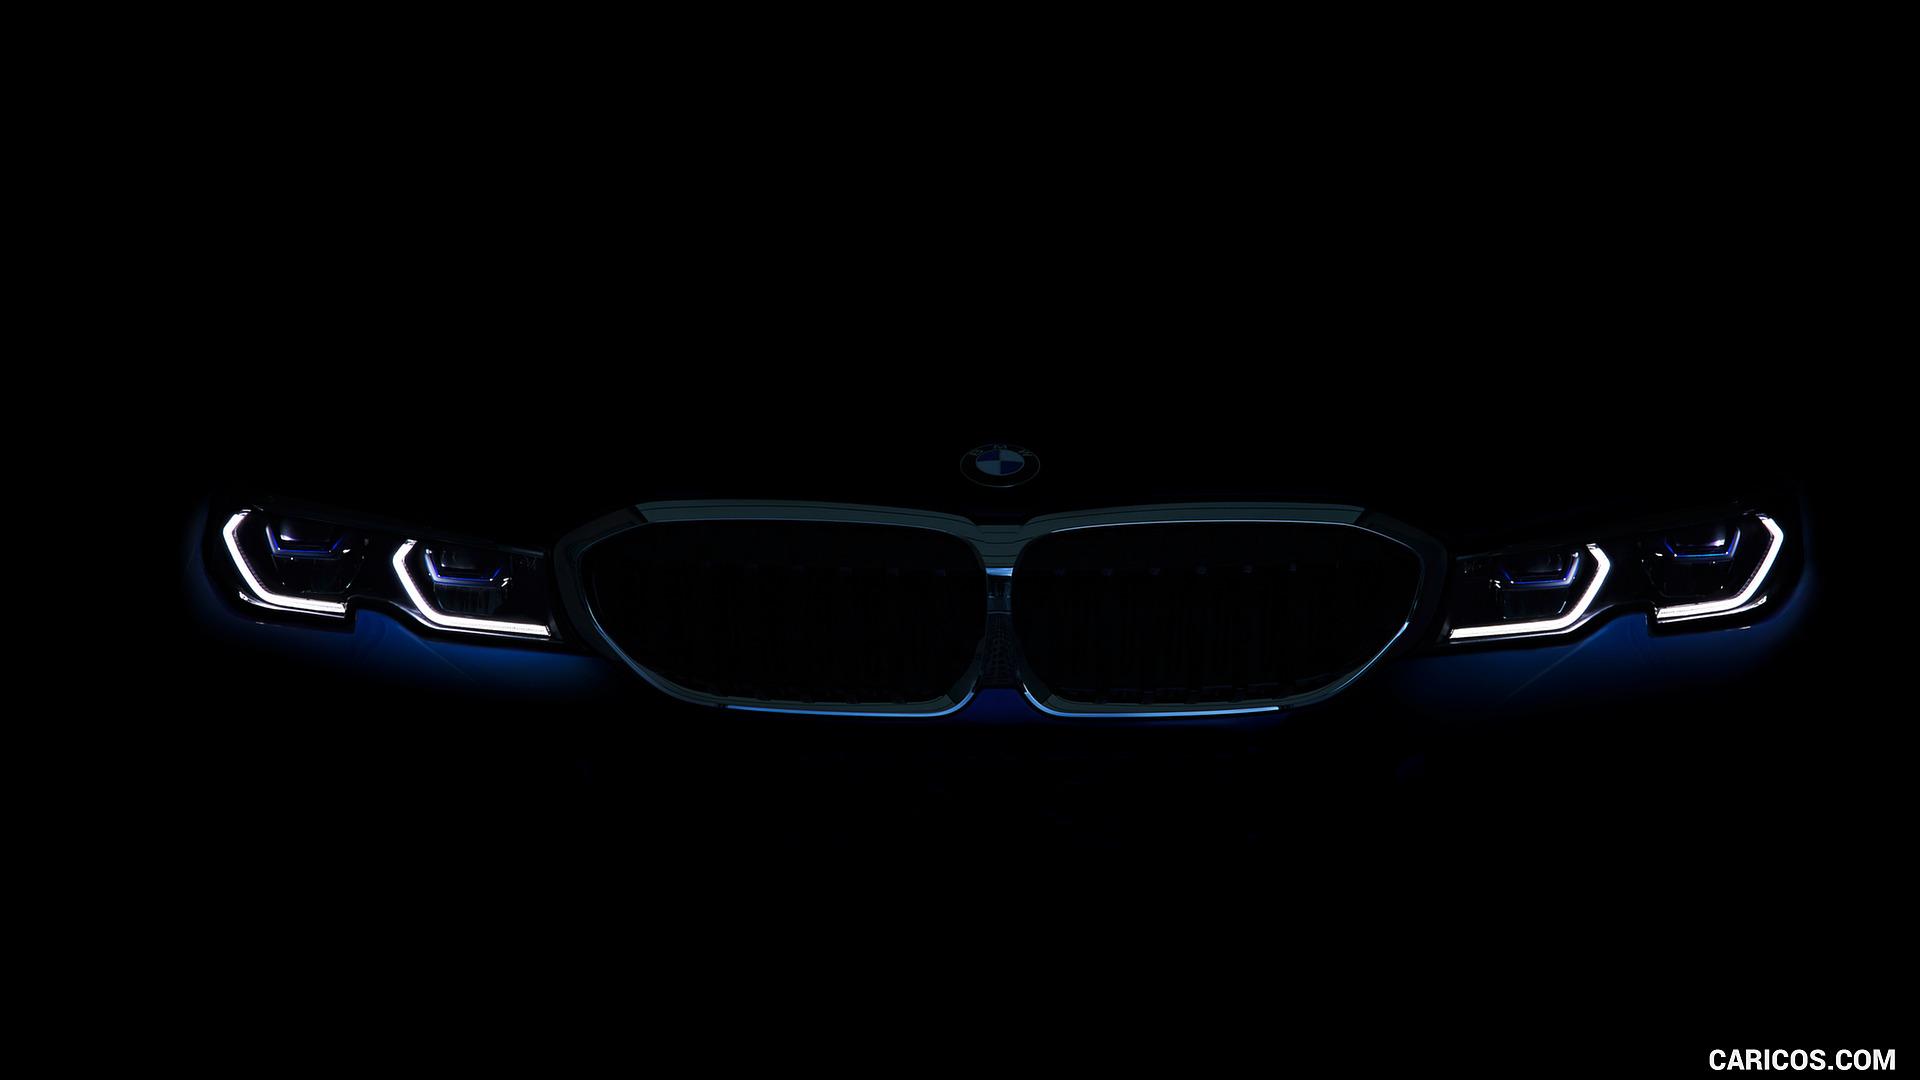 Bmw Lights Wallpapers